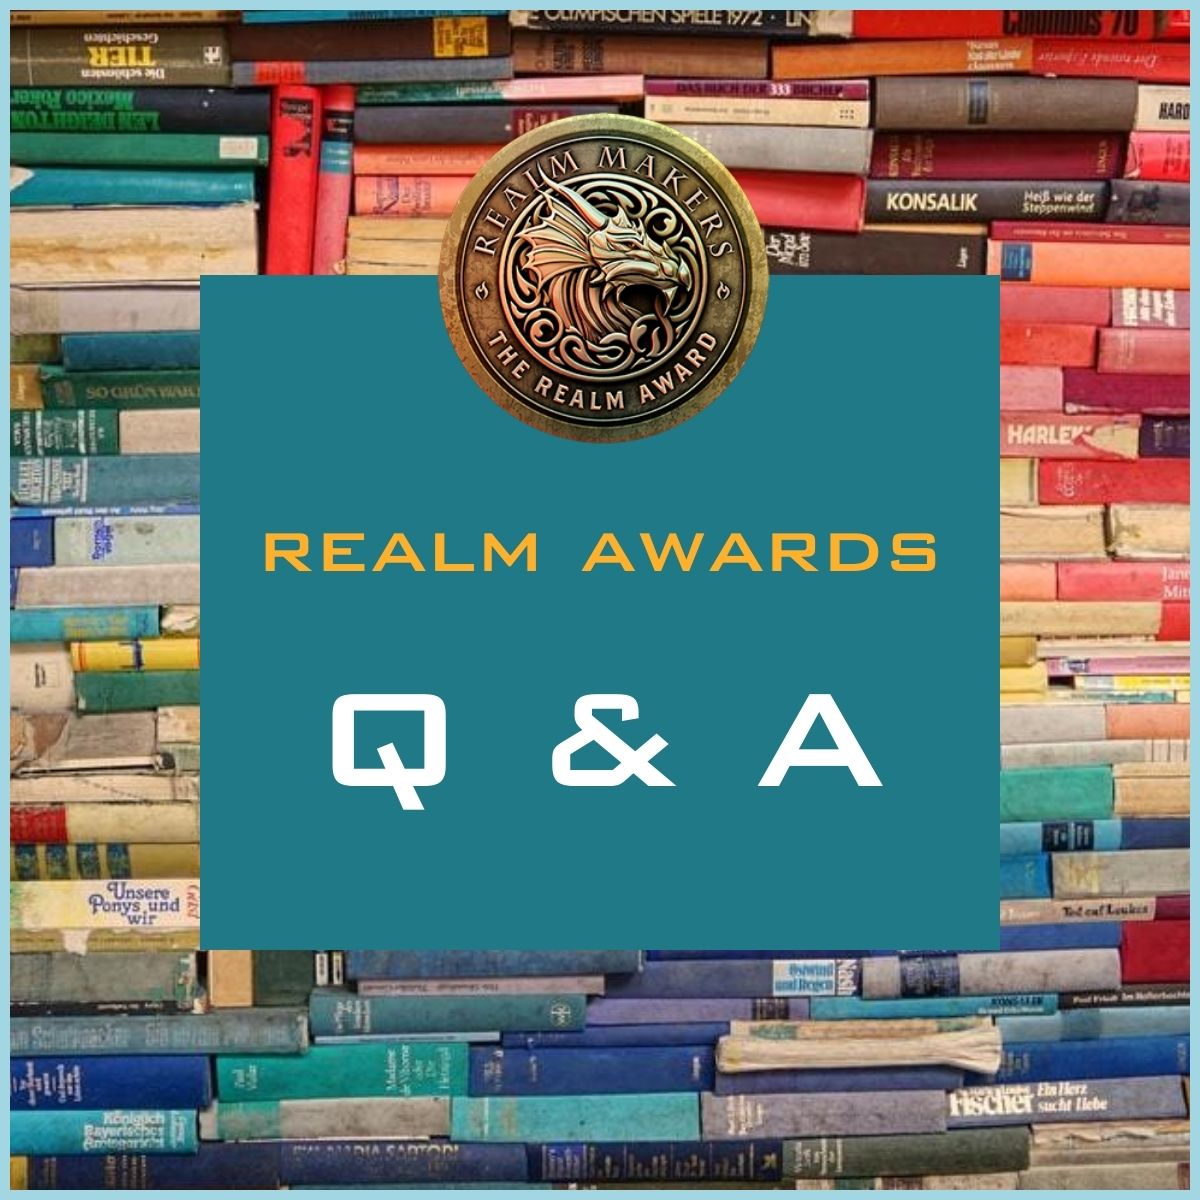 The Realm Awards are OPEN for submissions! Realm Makers